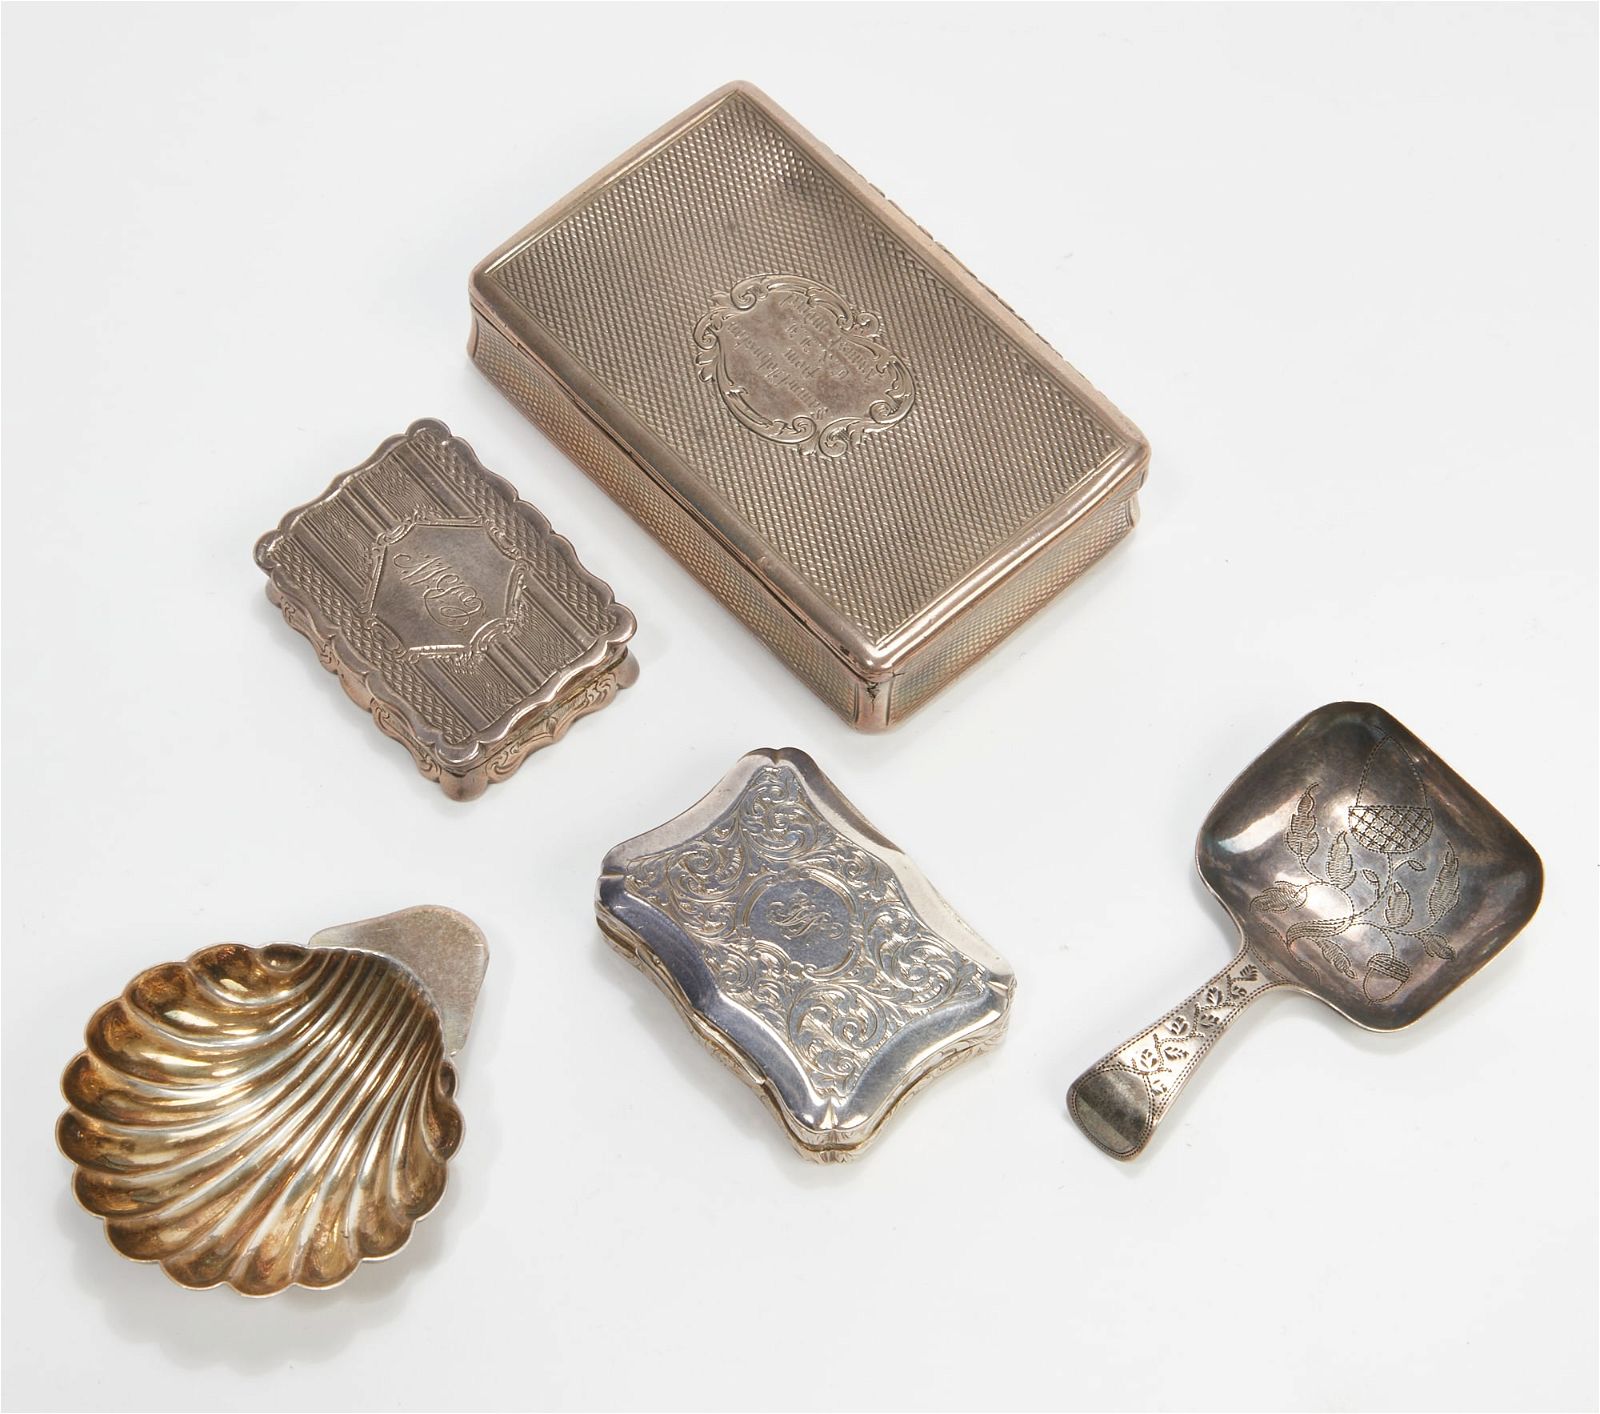 FIVE ENGLISH STERLING SILVER BOXES